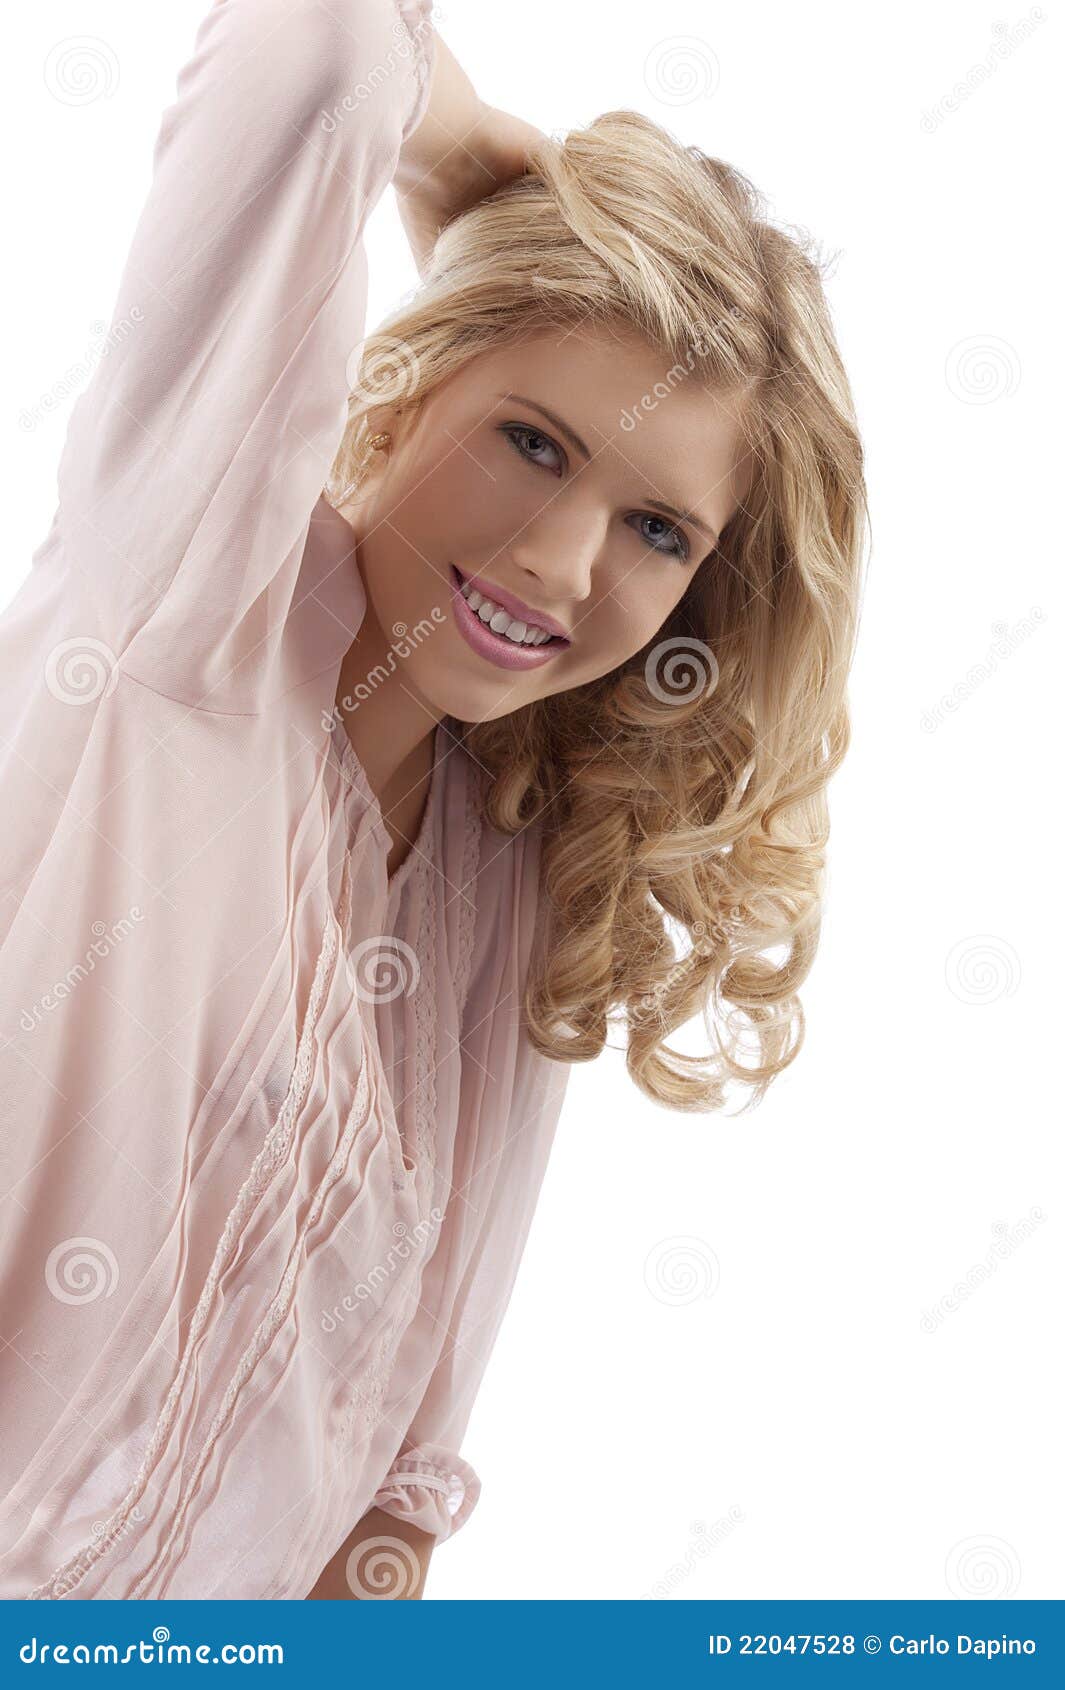 Blond Young Girl With Curly Hair Smiling Stock Photo 